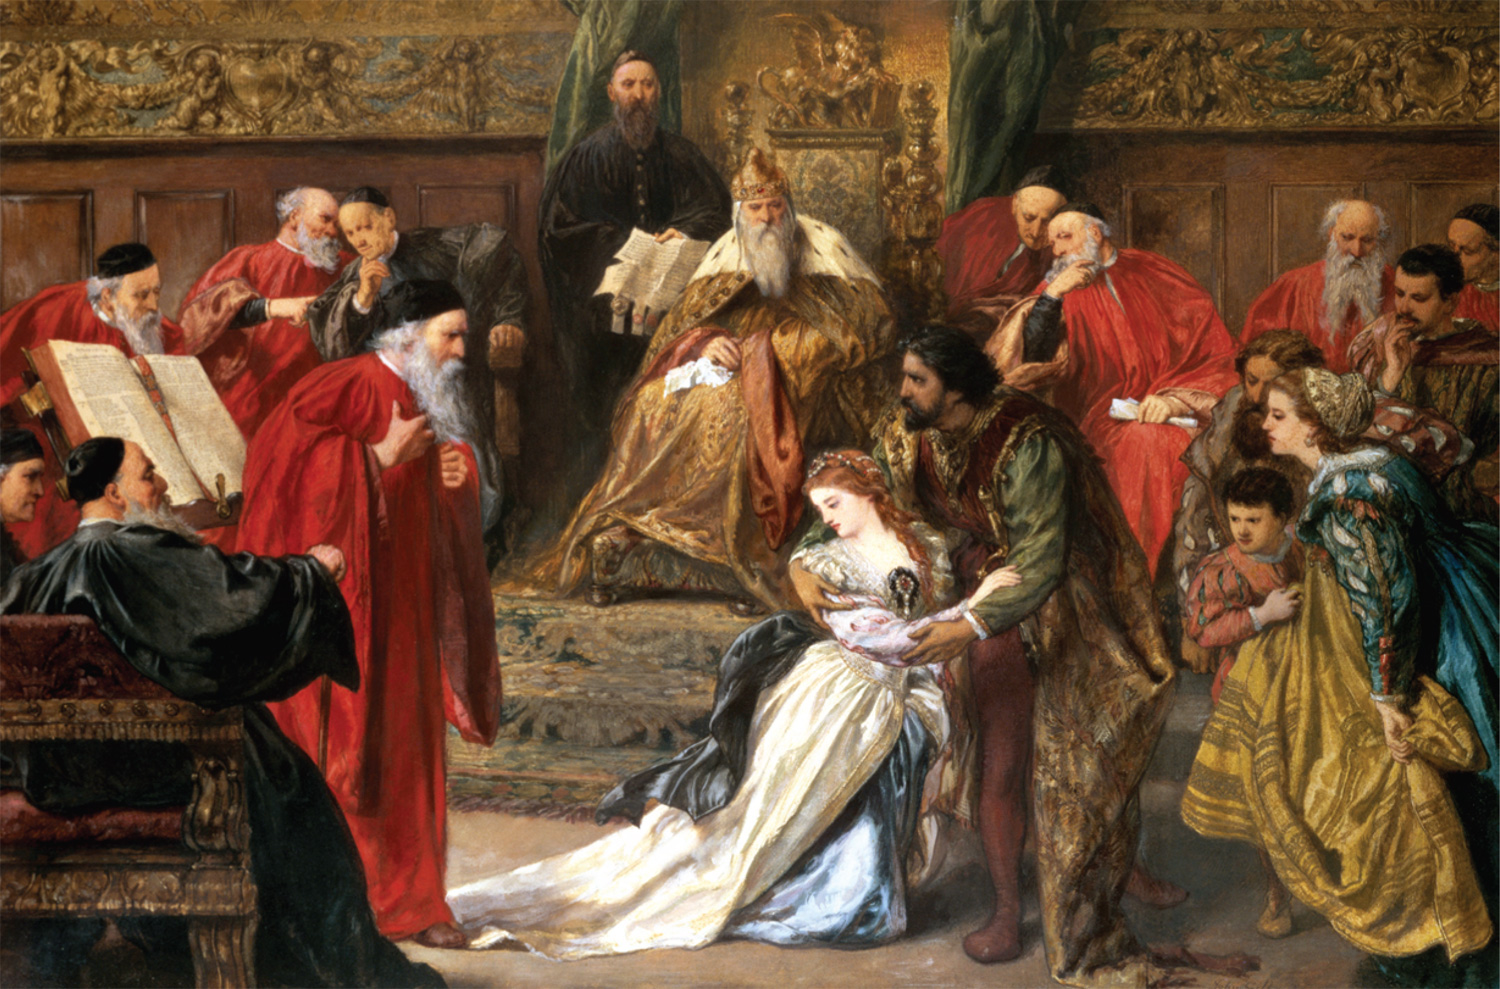 Sir John Gilbert's 1873 watercolor Cordelia in the Court of King Lear